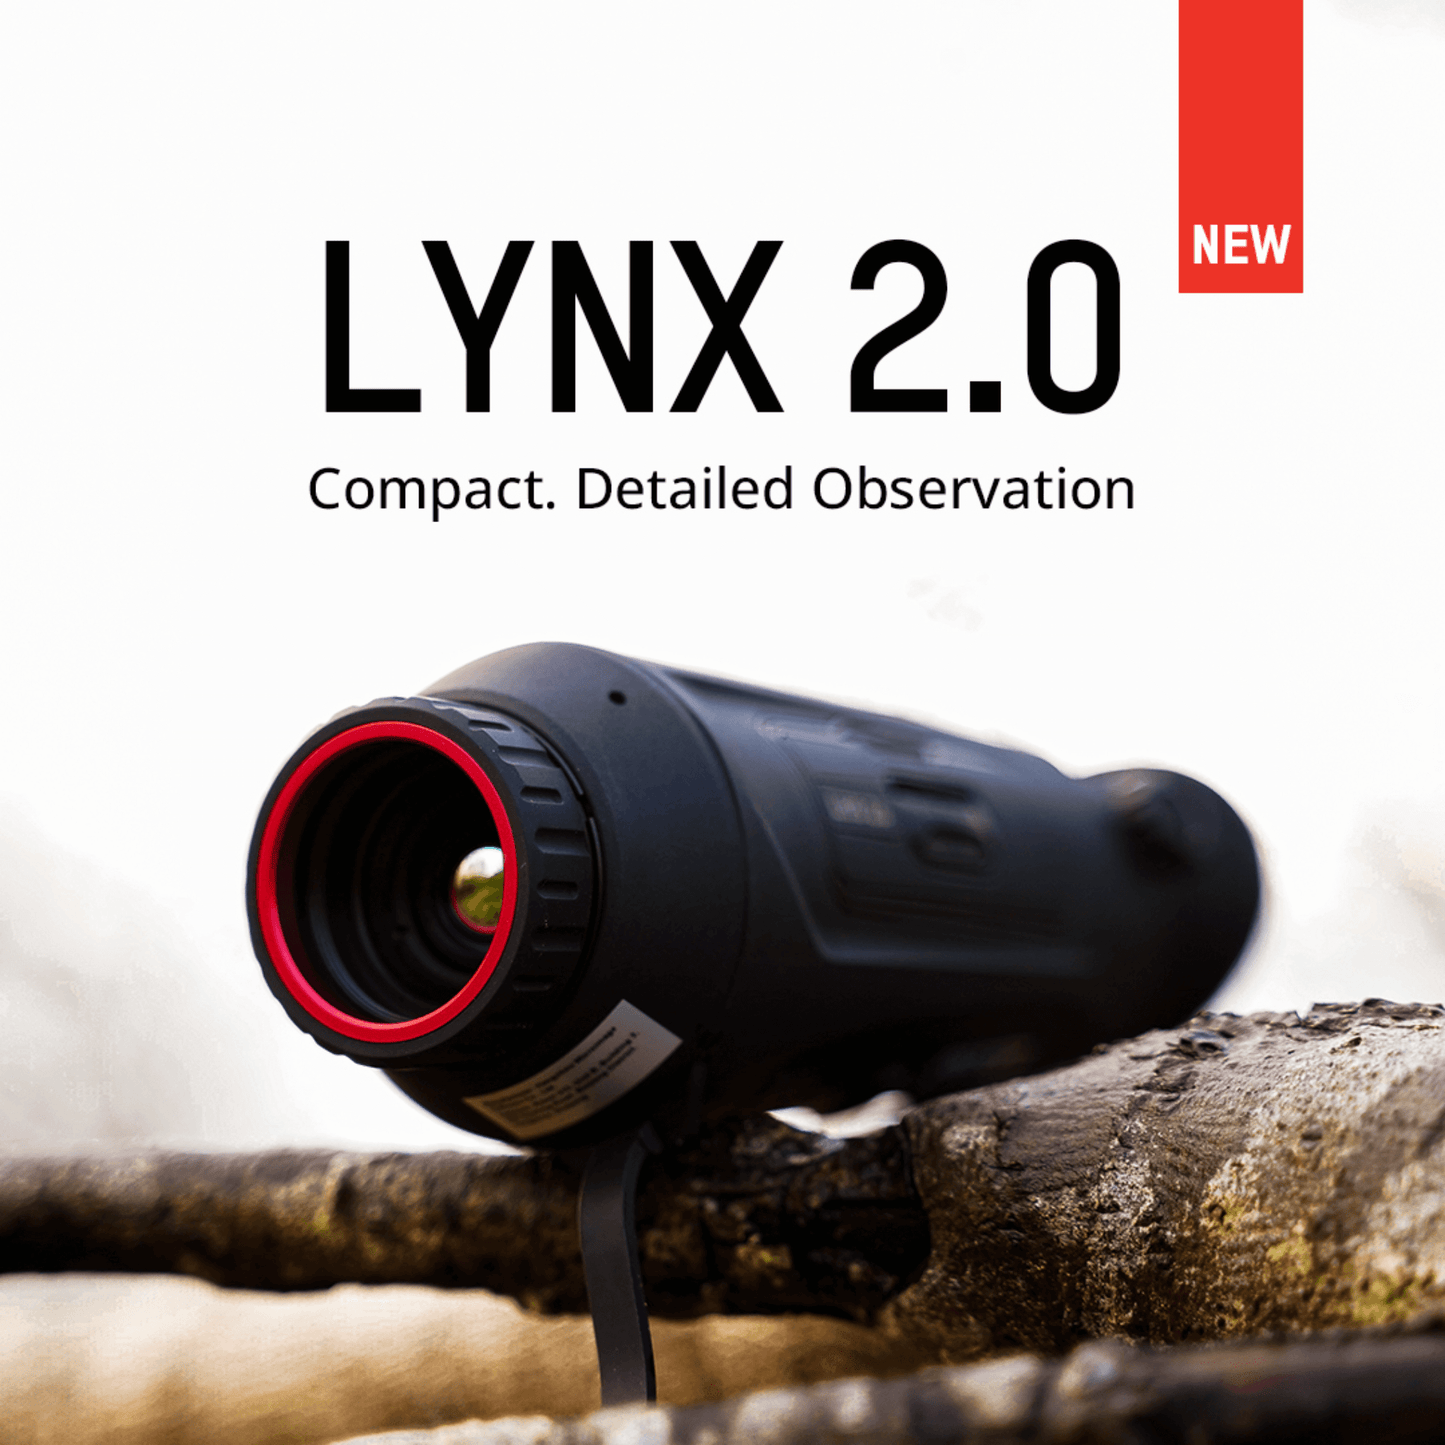 Lynx LH19 2.0 Handheld Thermal Spotter Product Banner Image compact detailed observation